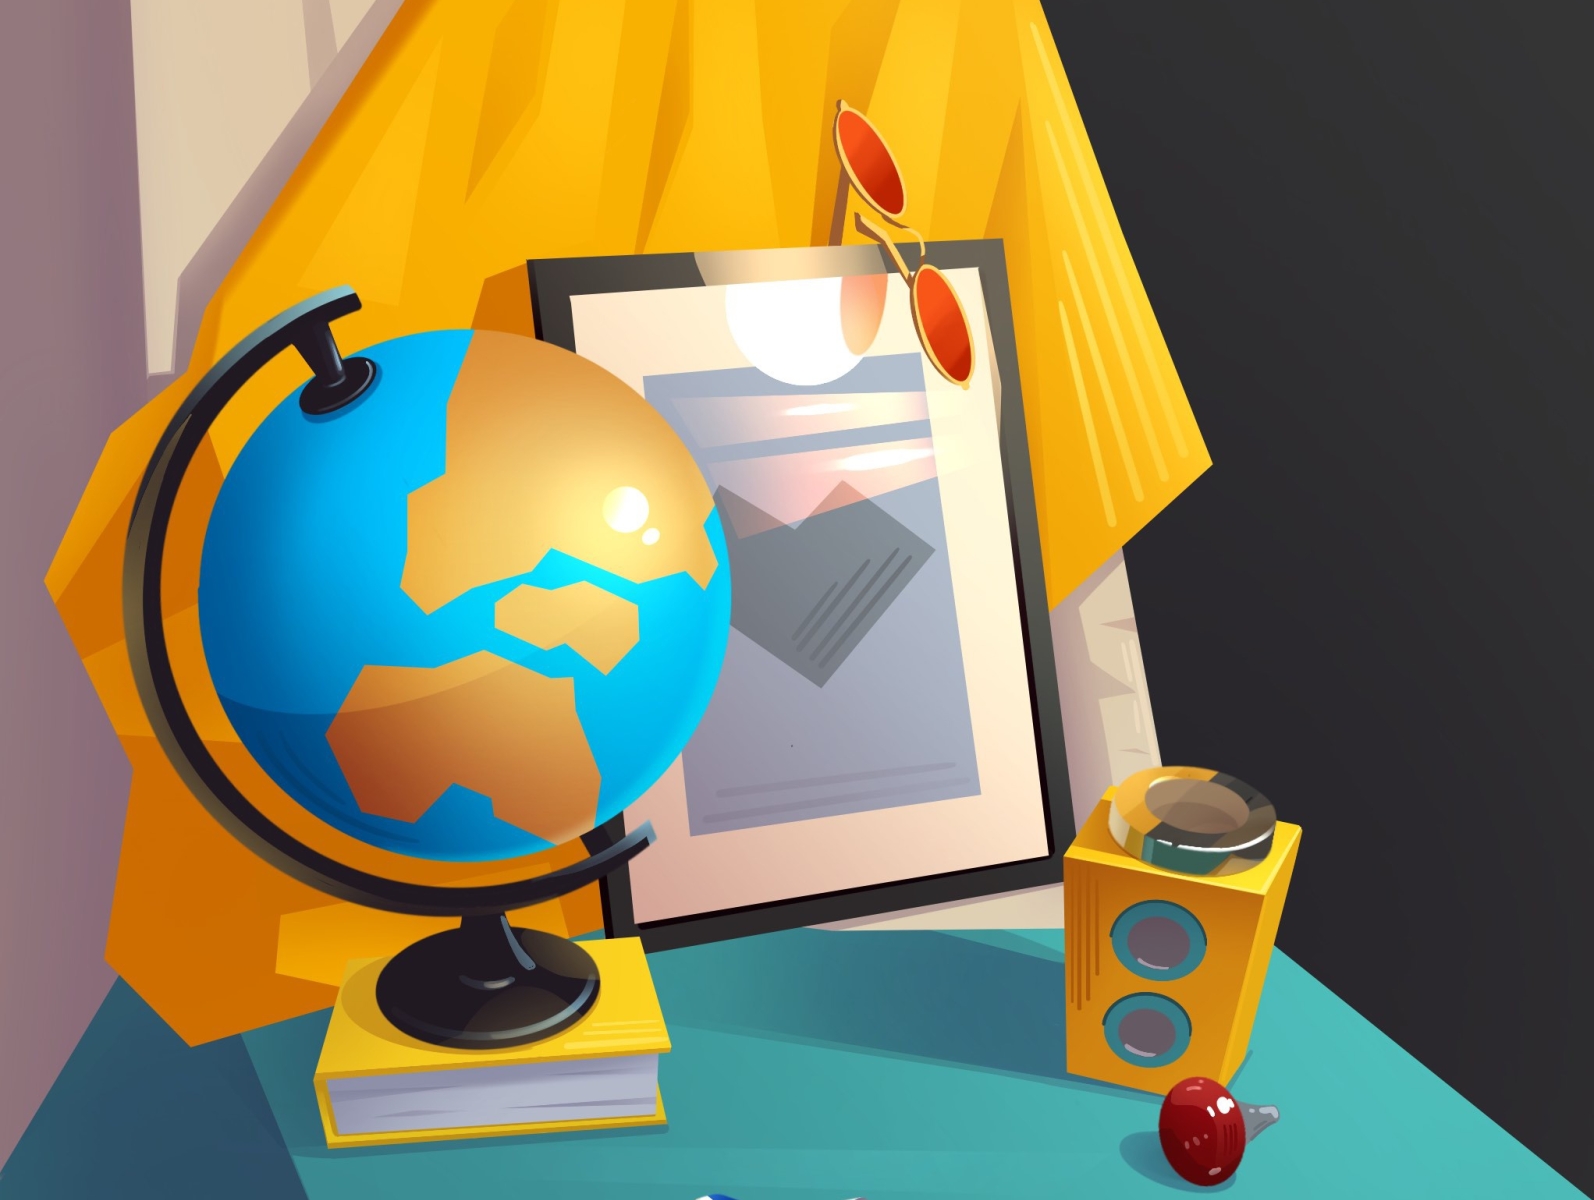 Geographic still life by Liza on Dribbble